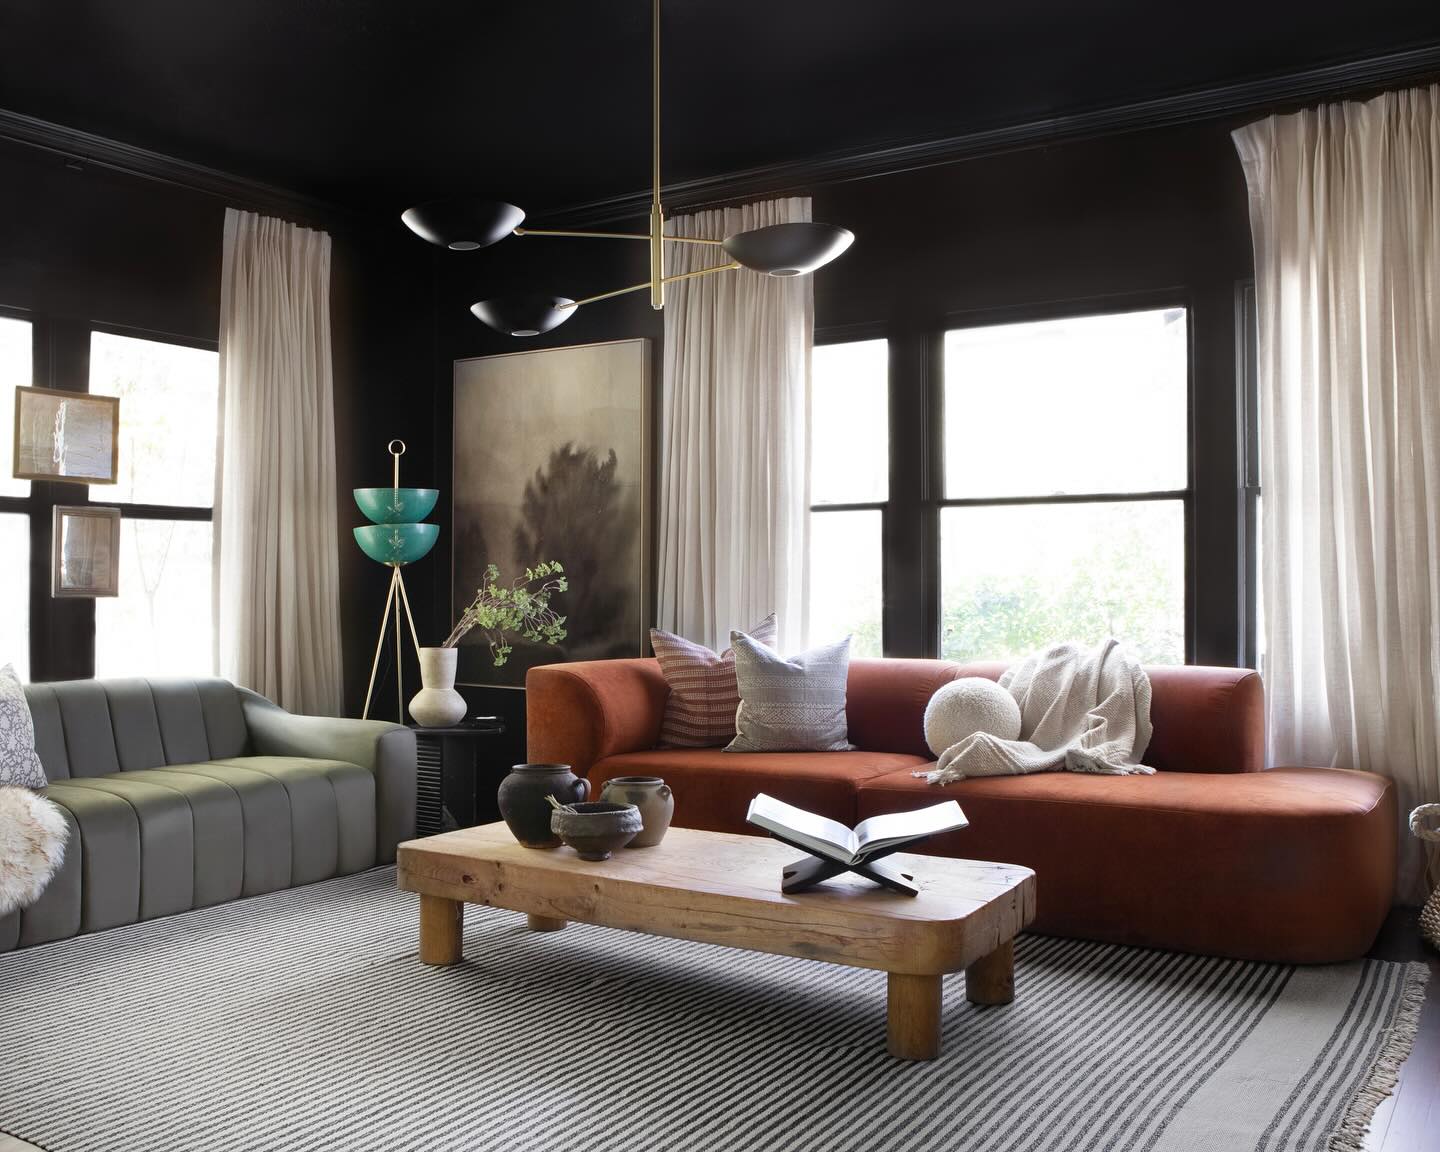 Living room with an orange and gray sofa from the NUEVO brand